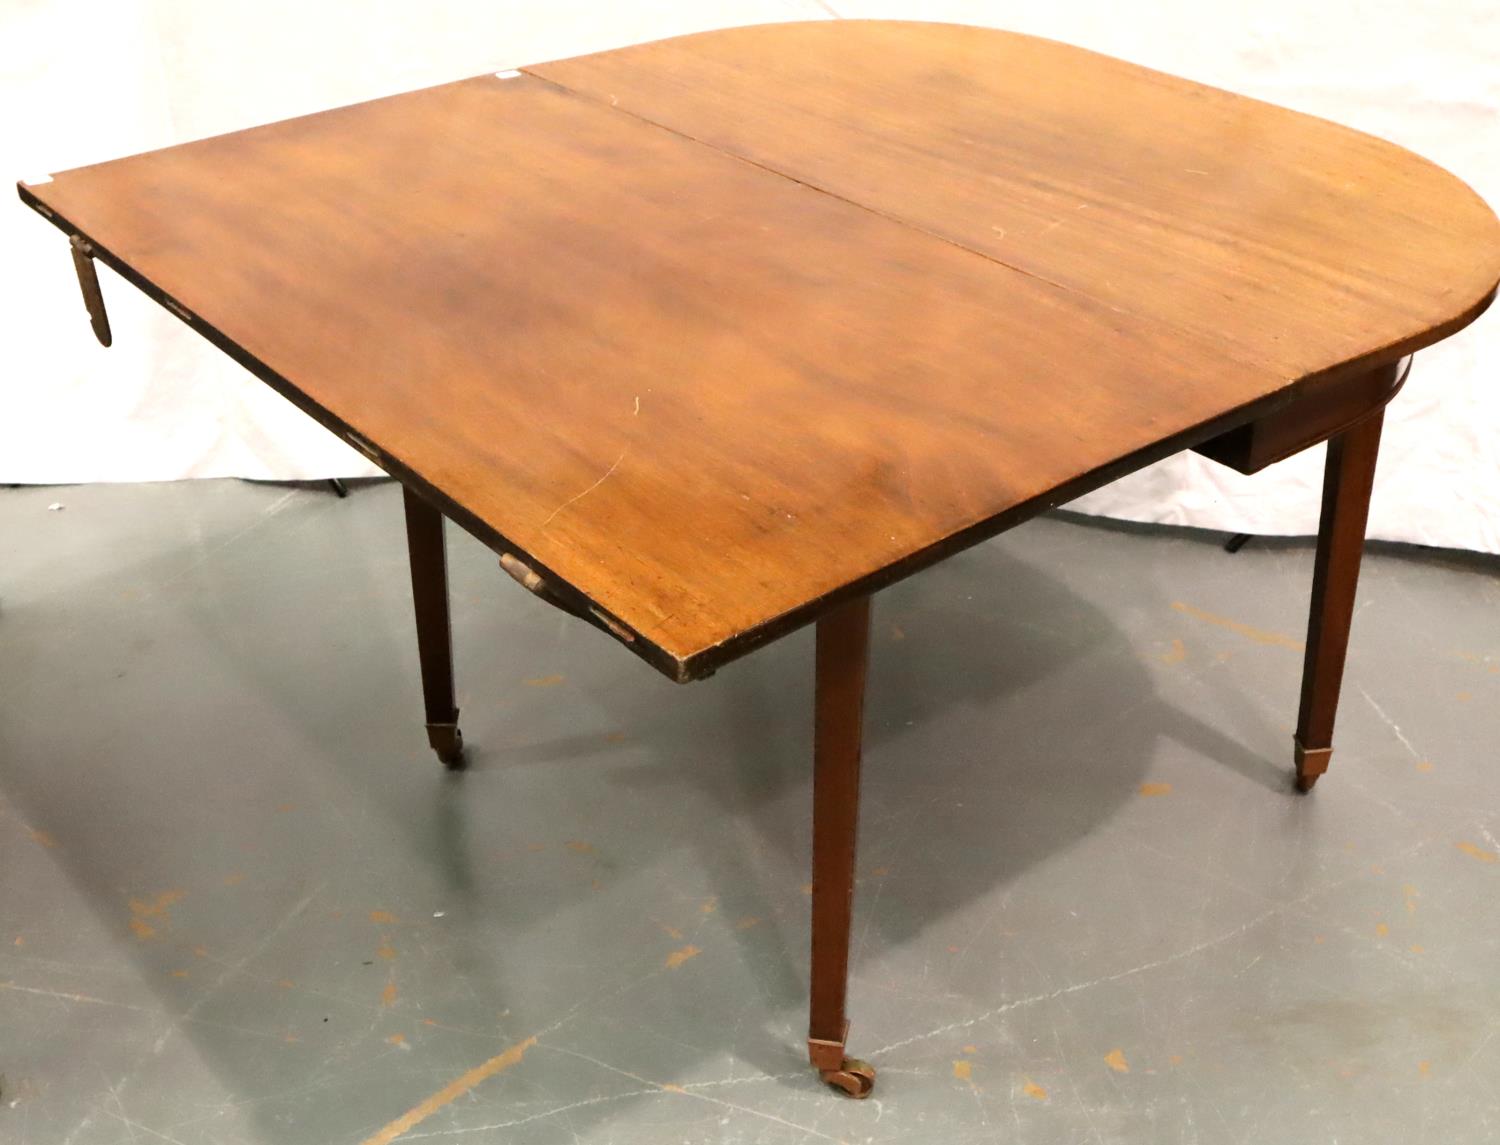 A George III mahogany extending dining table raised on tapering supports, 175 x 114 x 75 cm H. Not - Image 5 of 6